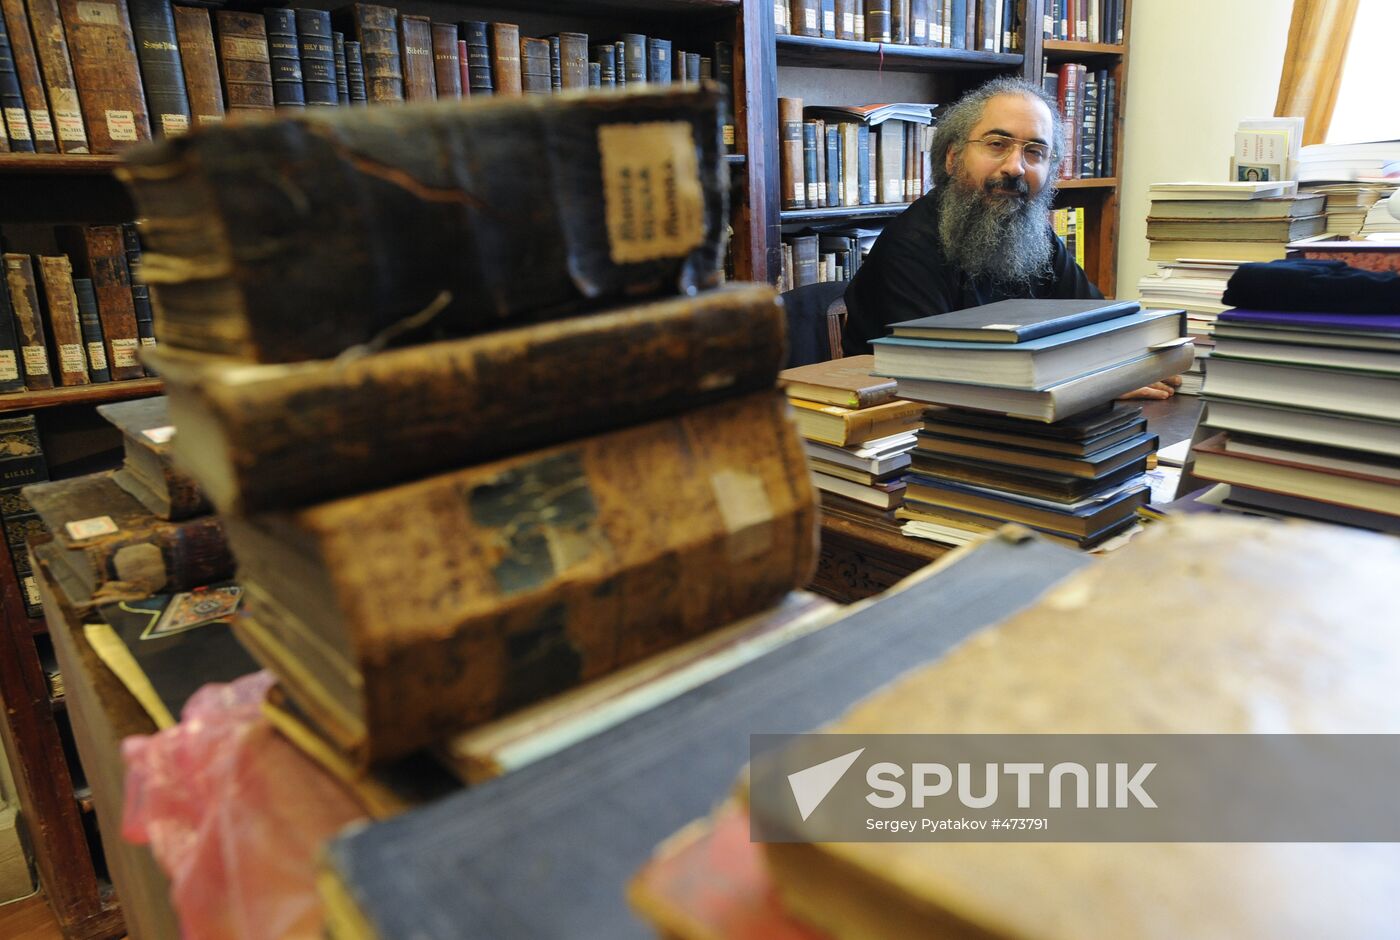 Petersburg Seminary Library Book Collection